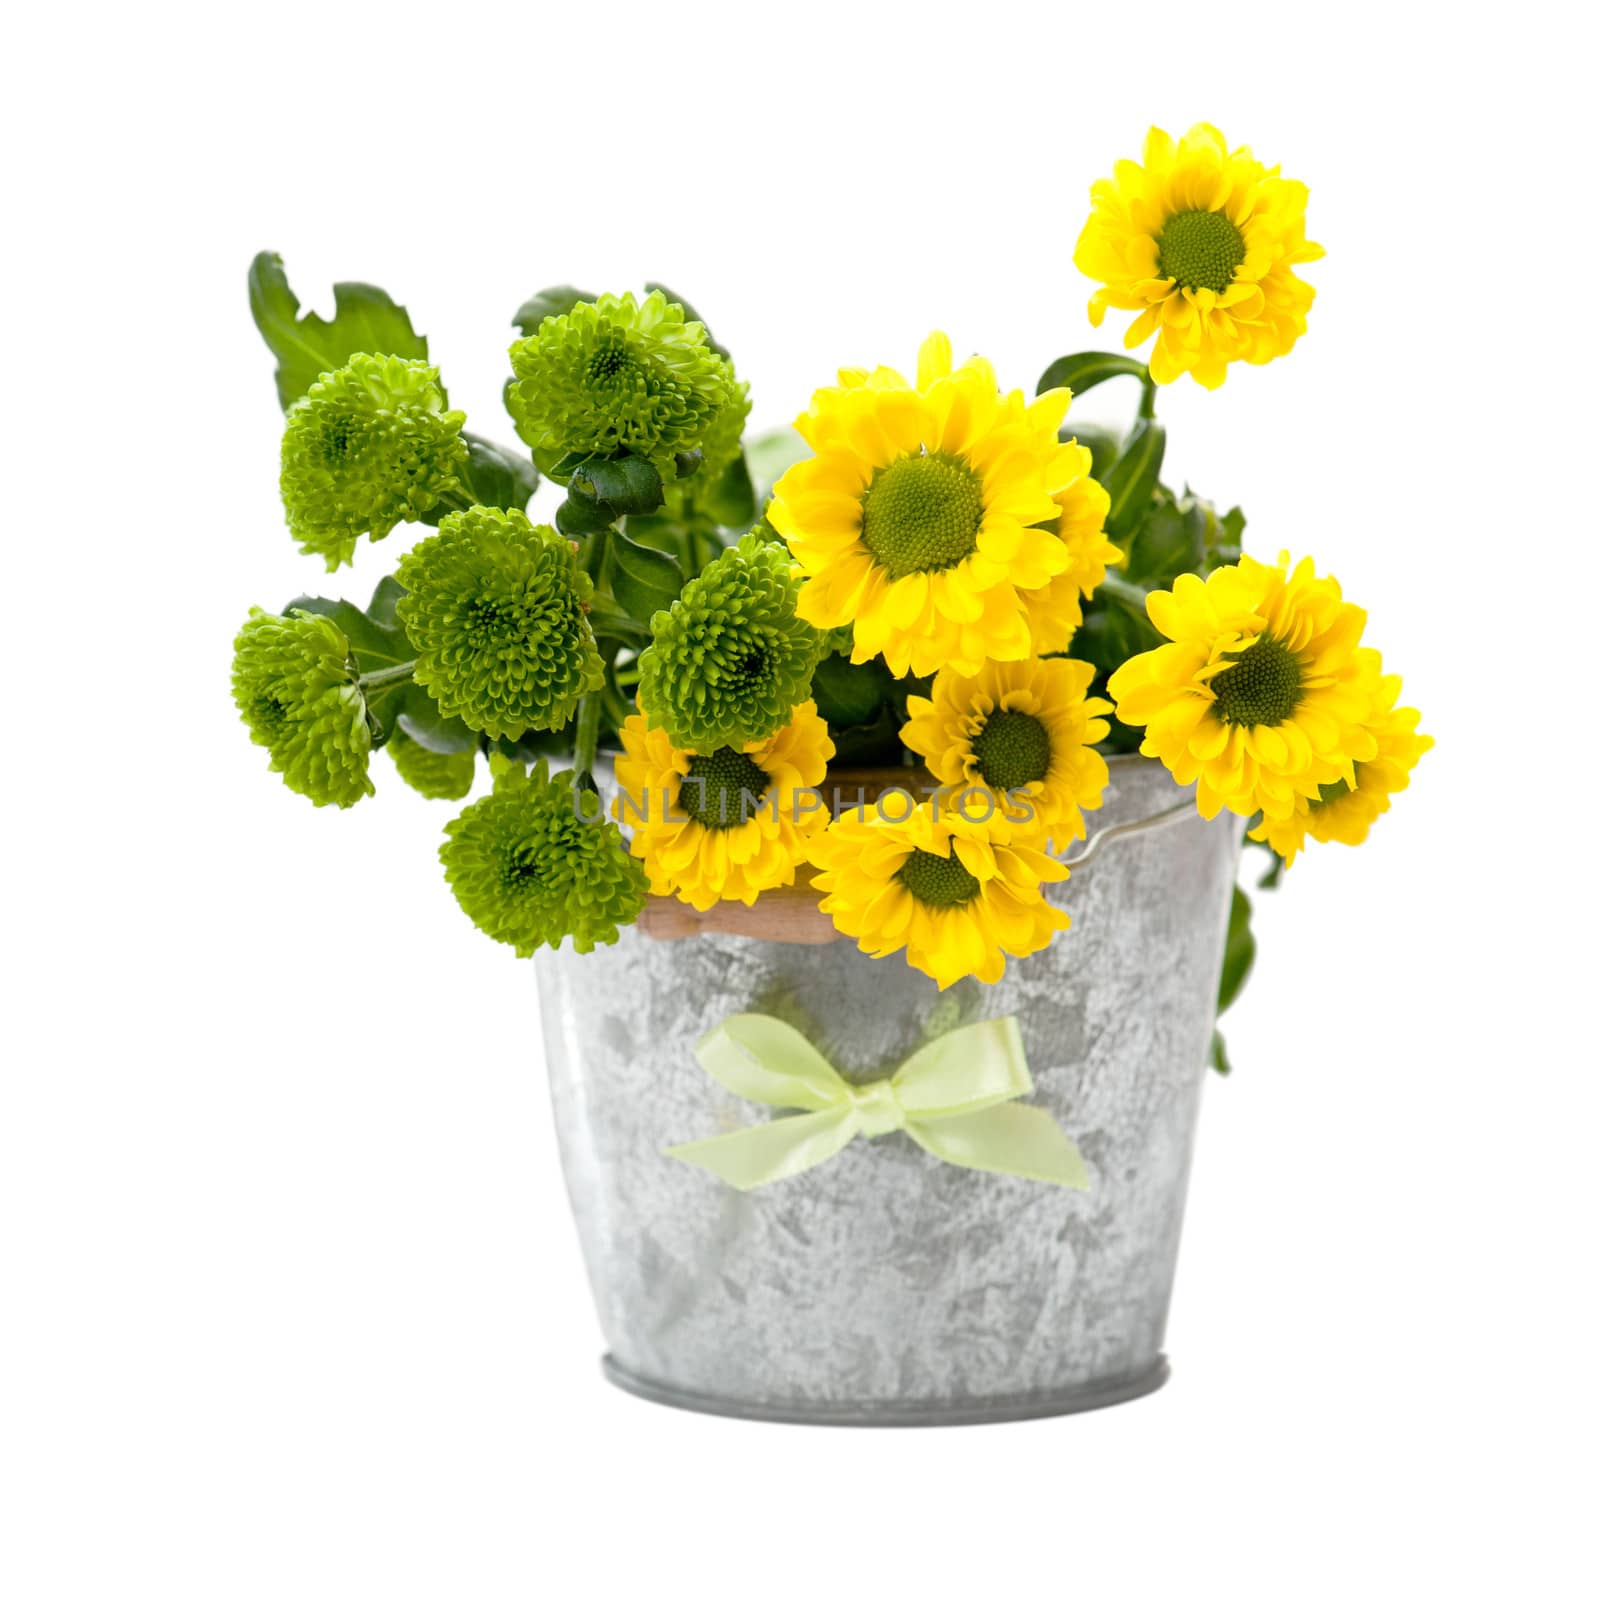 Yellow and green flowers in a tin bucket isolated on white